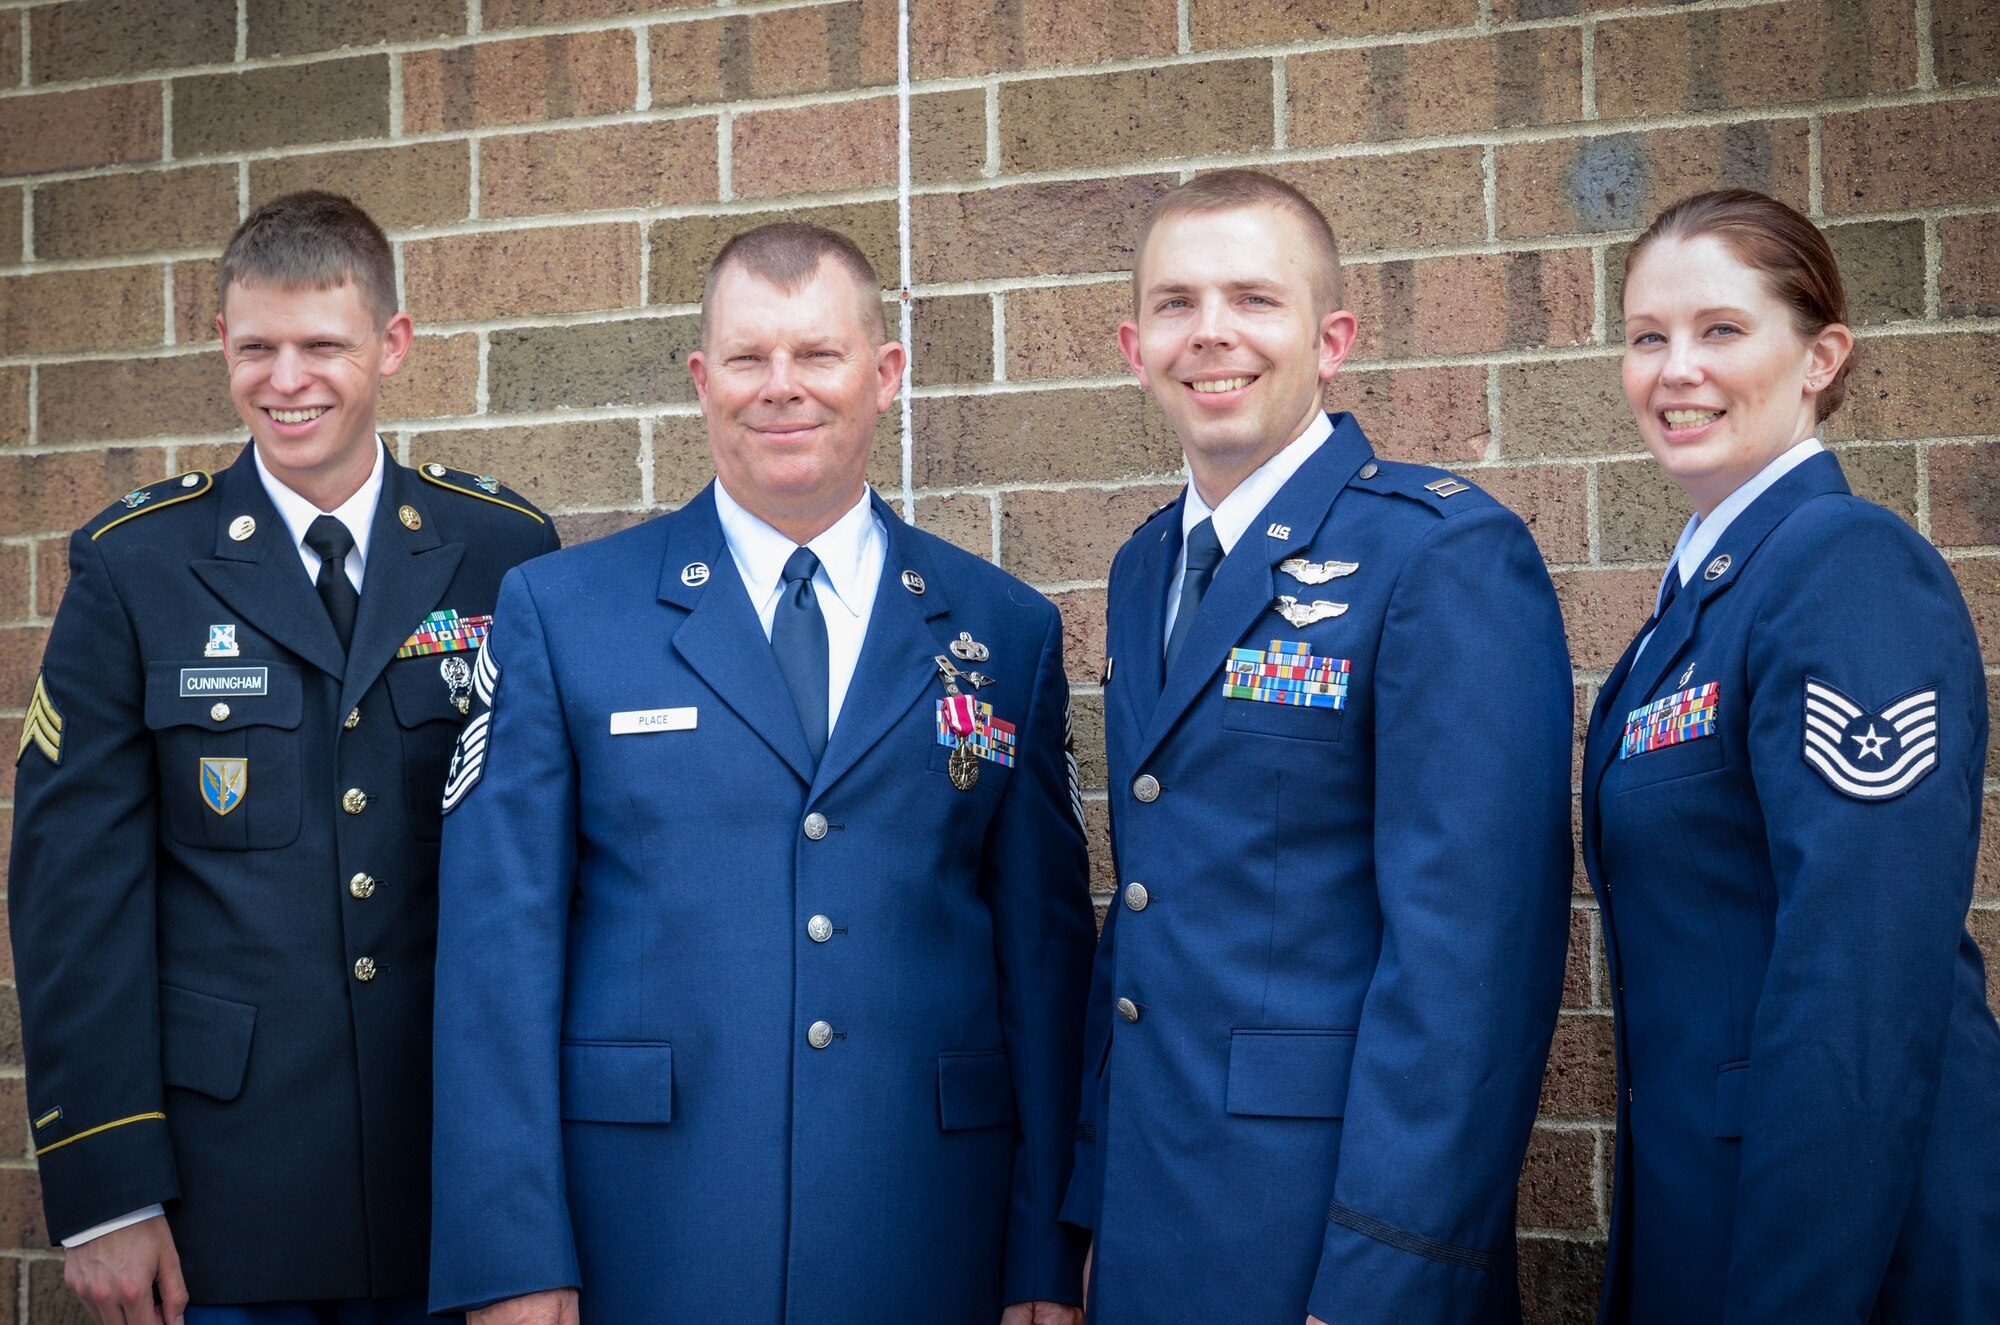 From left to right, the chief's nephew, Army Sgt. Samuel Cunningham; Chief Master Sgt. Dale Place;  his son, Capt. Lee Place; and his daughter Tech. Sgt. Rebecca Place. (Air Force Photo/Master Sgt. Eric Amidon)